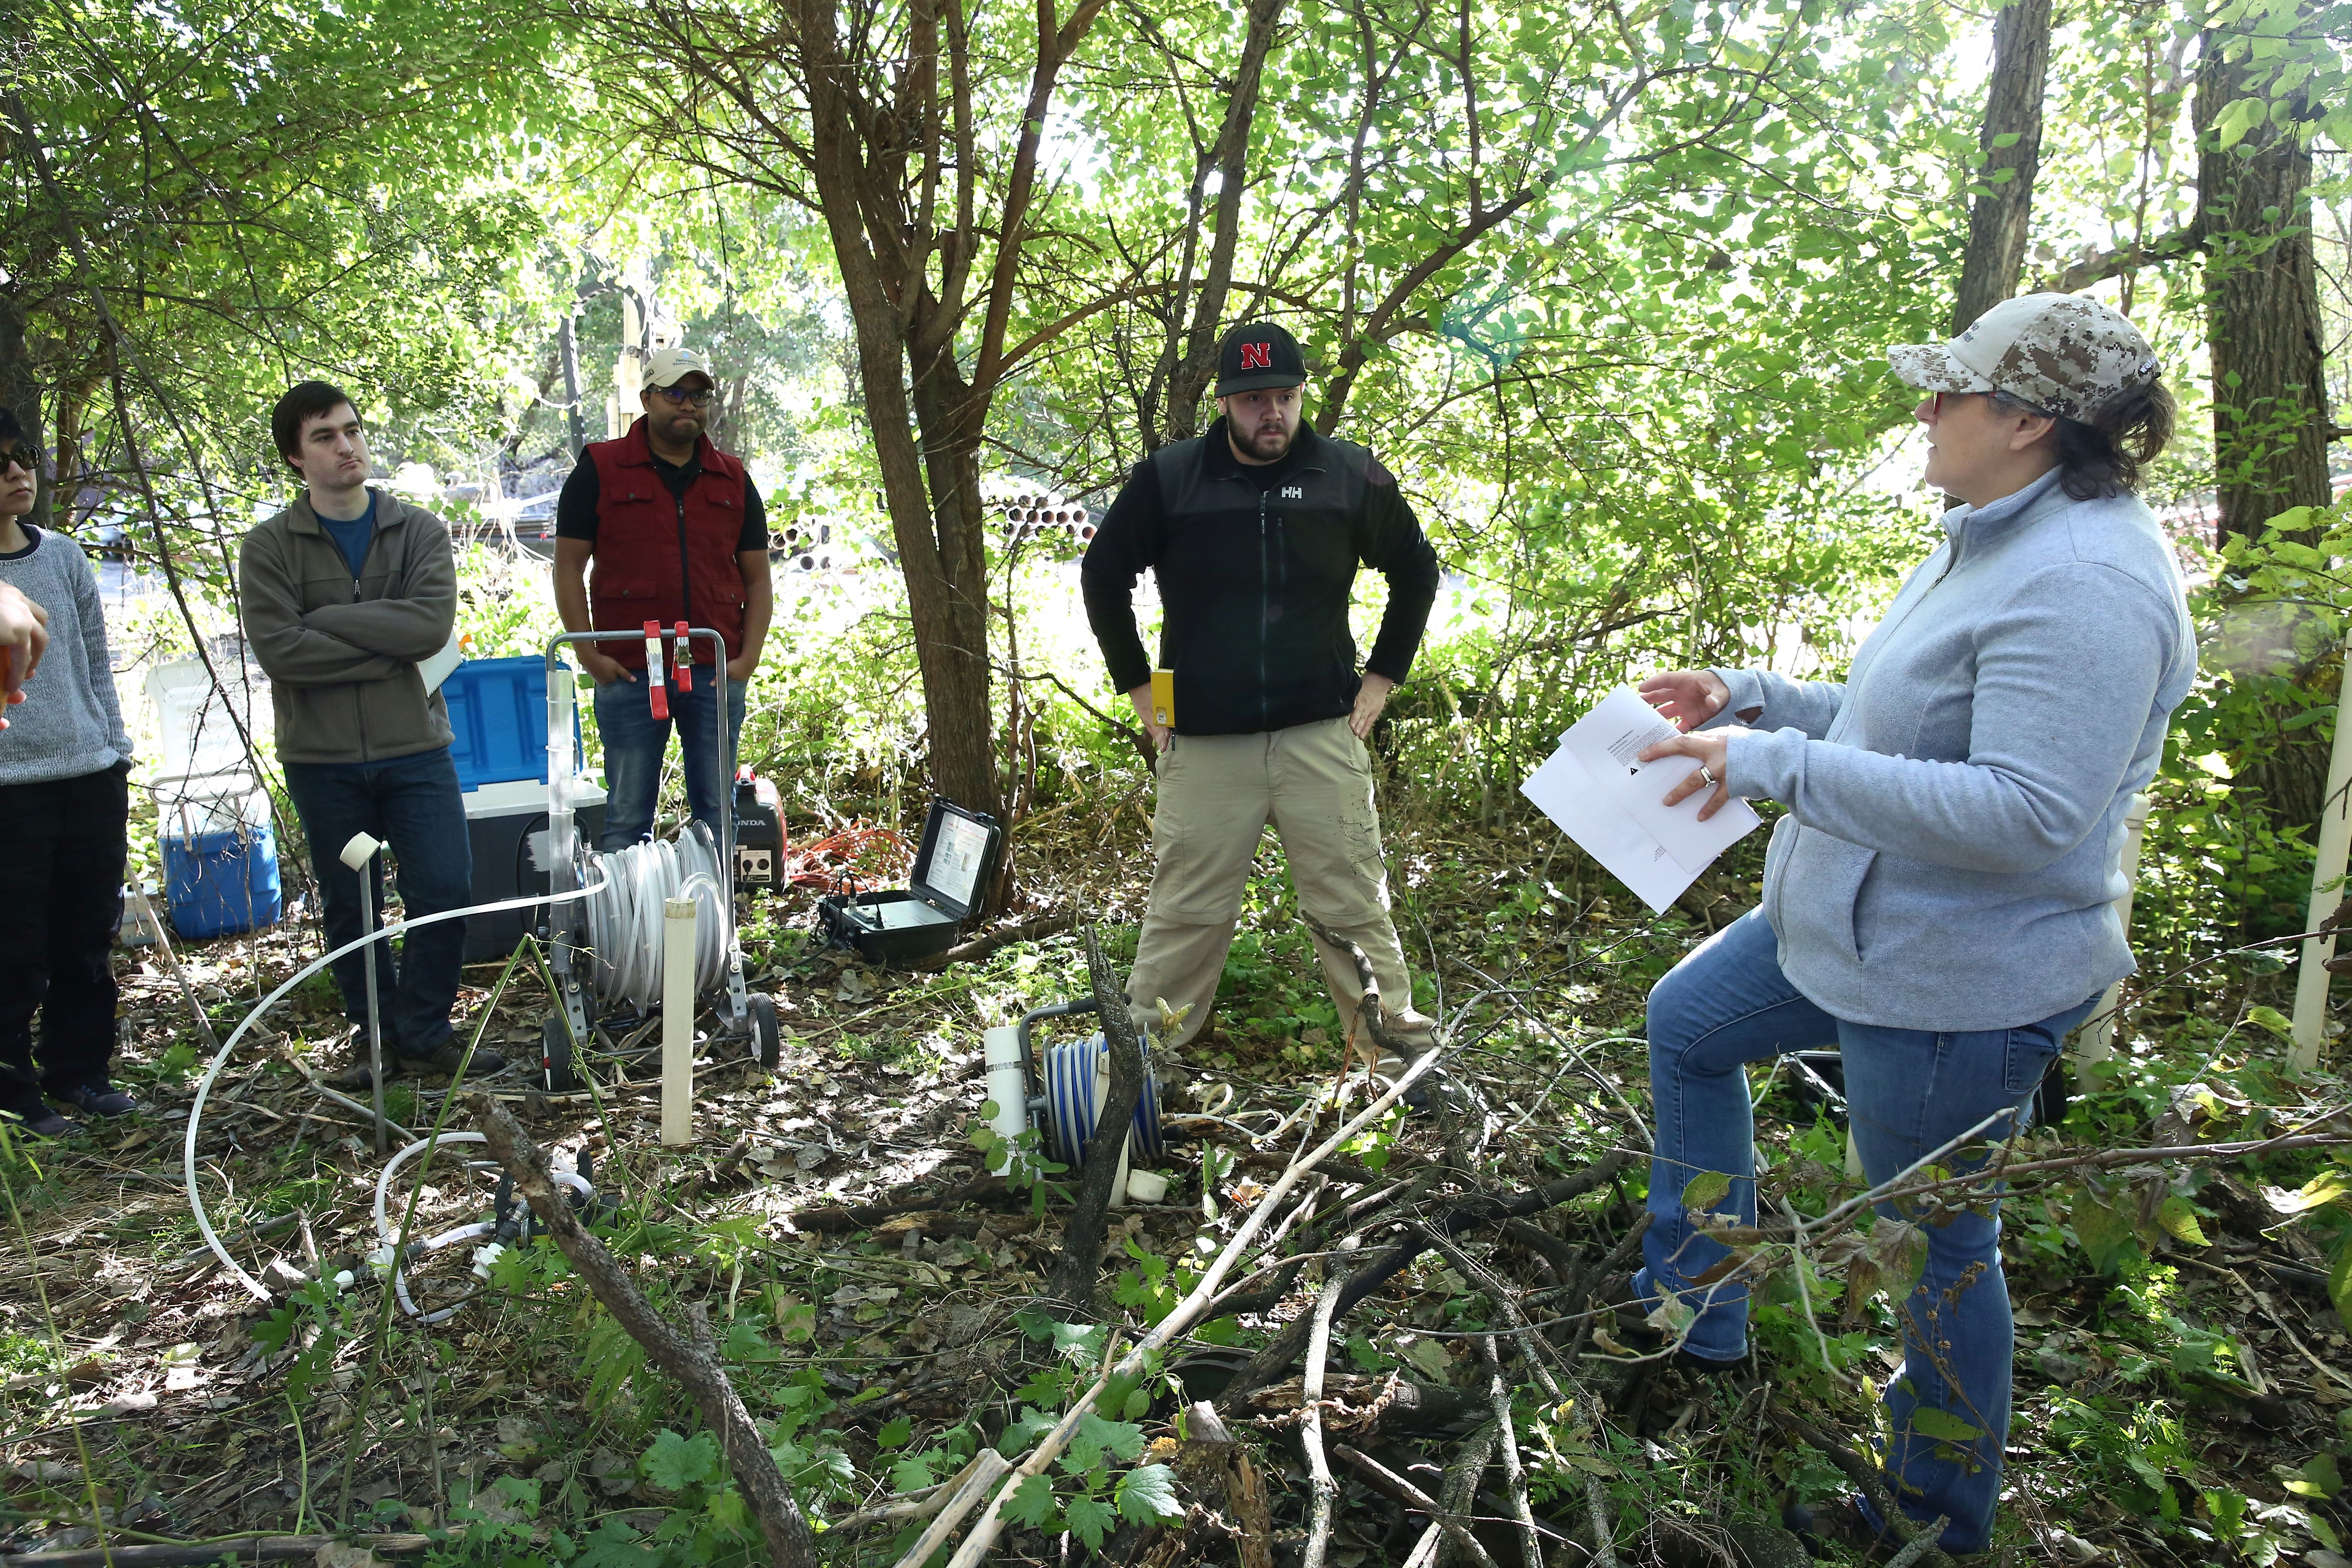 DWFI Faculty Fellow Karrie Weber (right), associate professor of biological sciences and earth and atmospheric sciences, provides direction to students as they prepare to test uranium levels in groundwater near Alda, Nebraska.